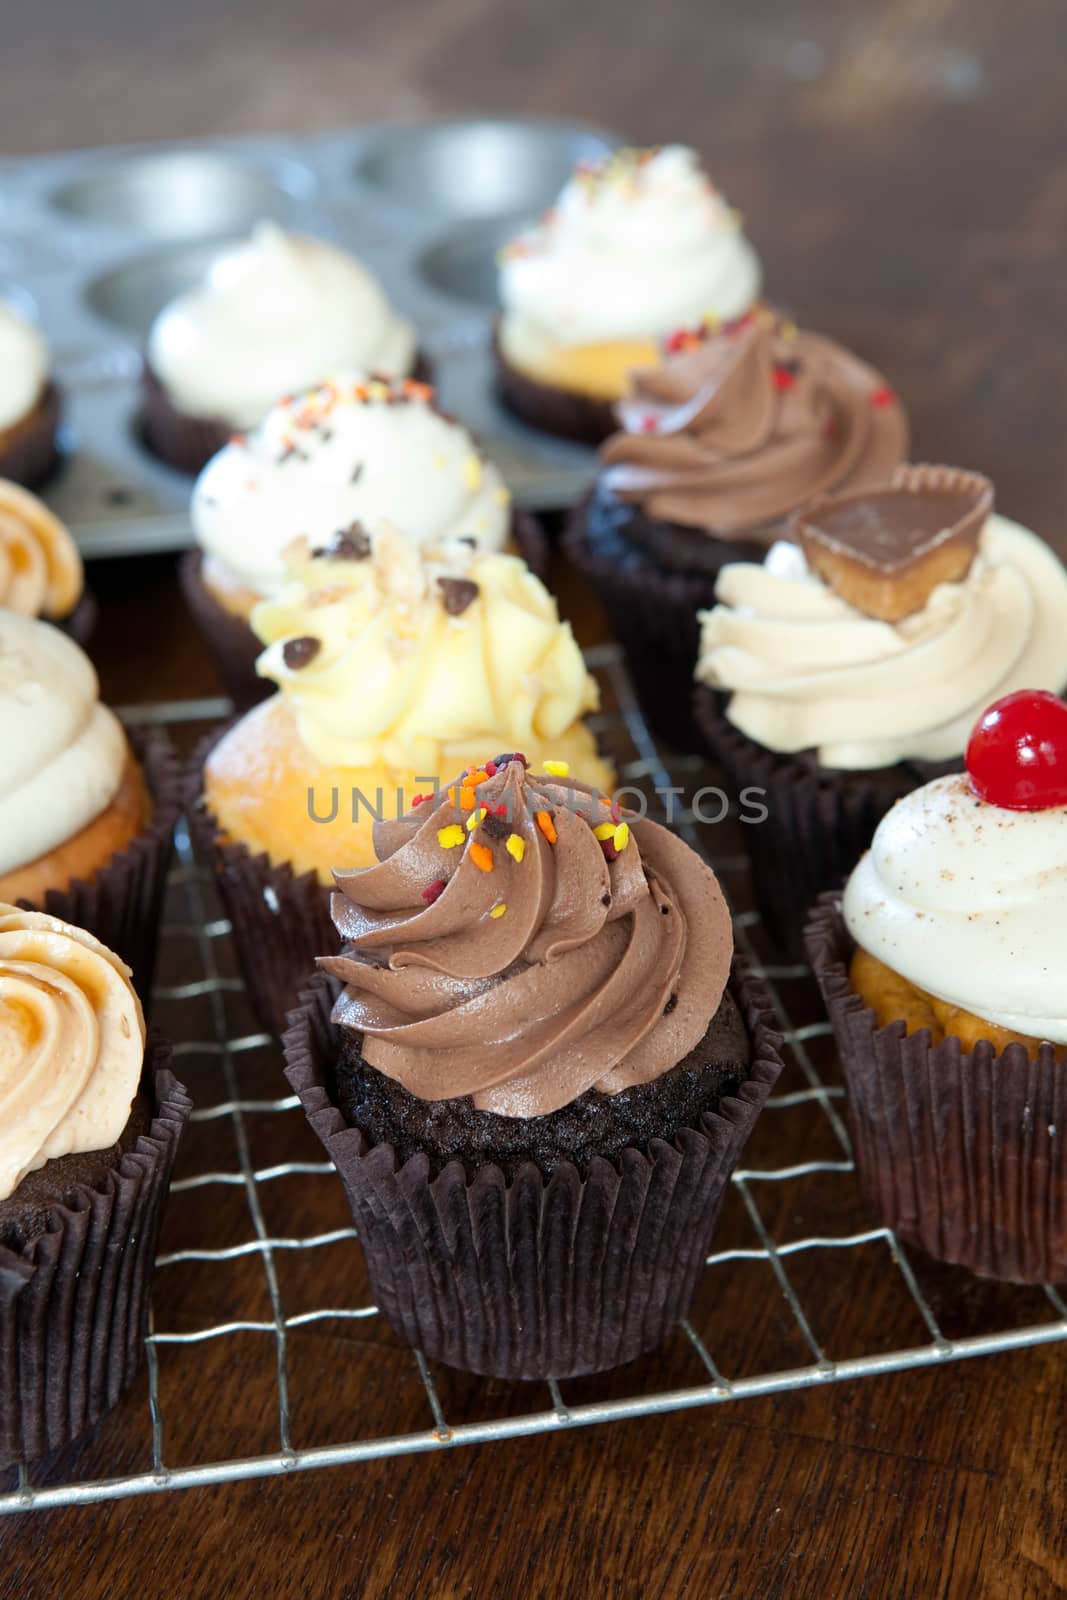 Close up of some decadent gourmet cupcakes frosted with a variety of frosting flavors. Shallow depth of field.